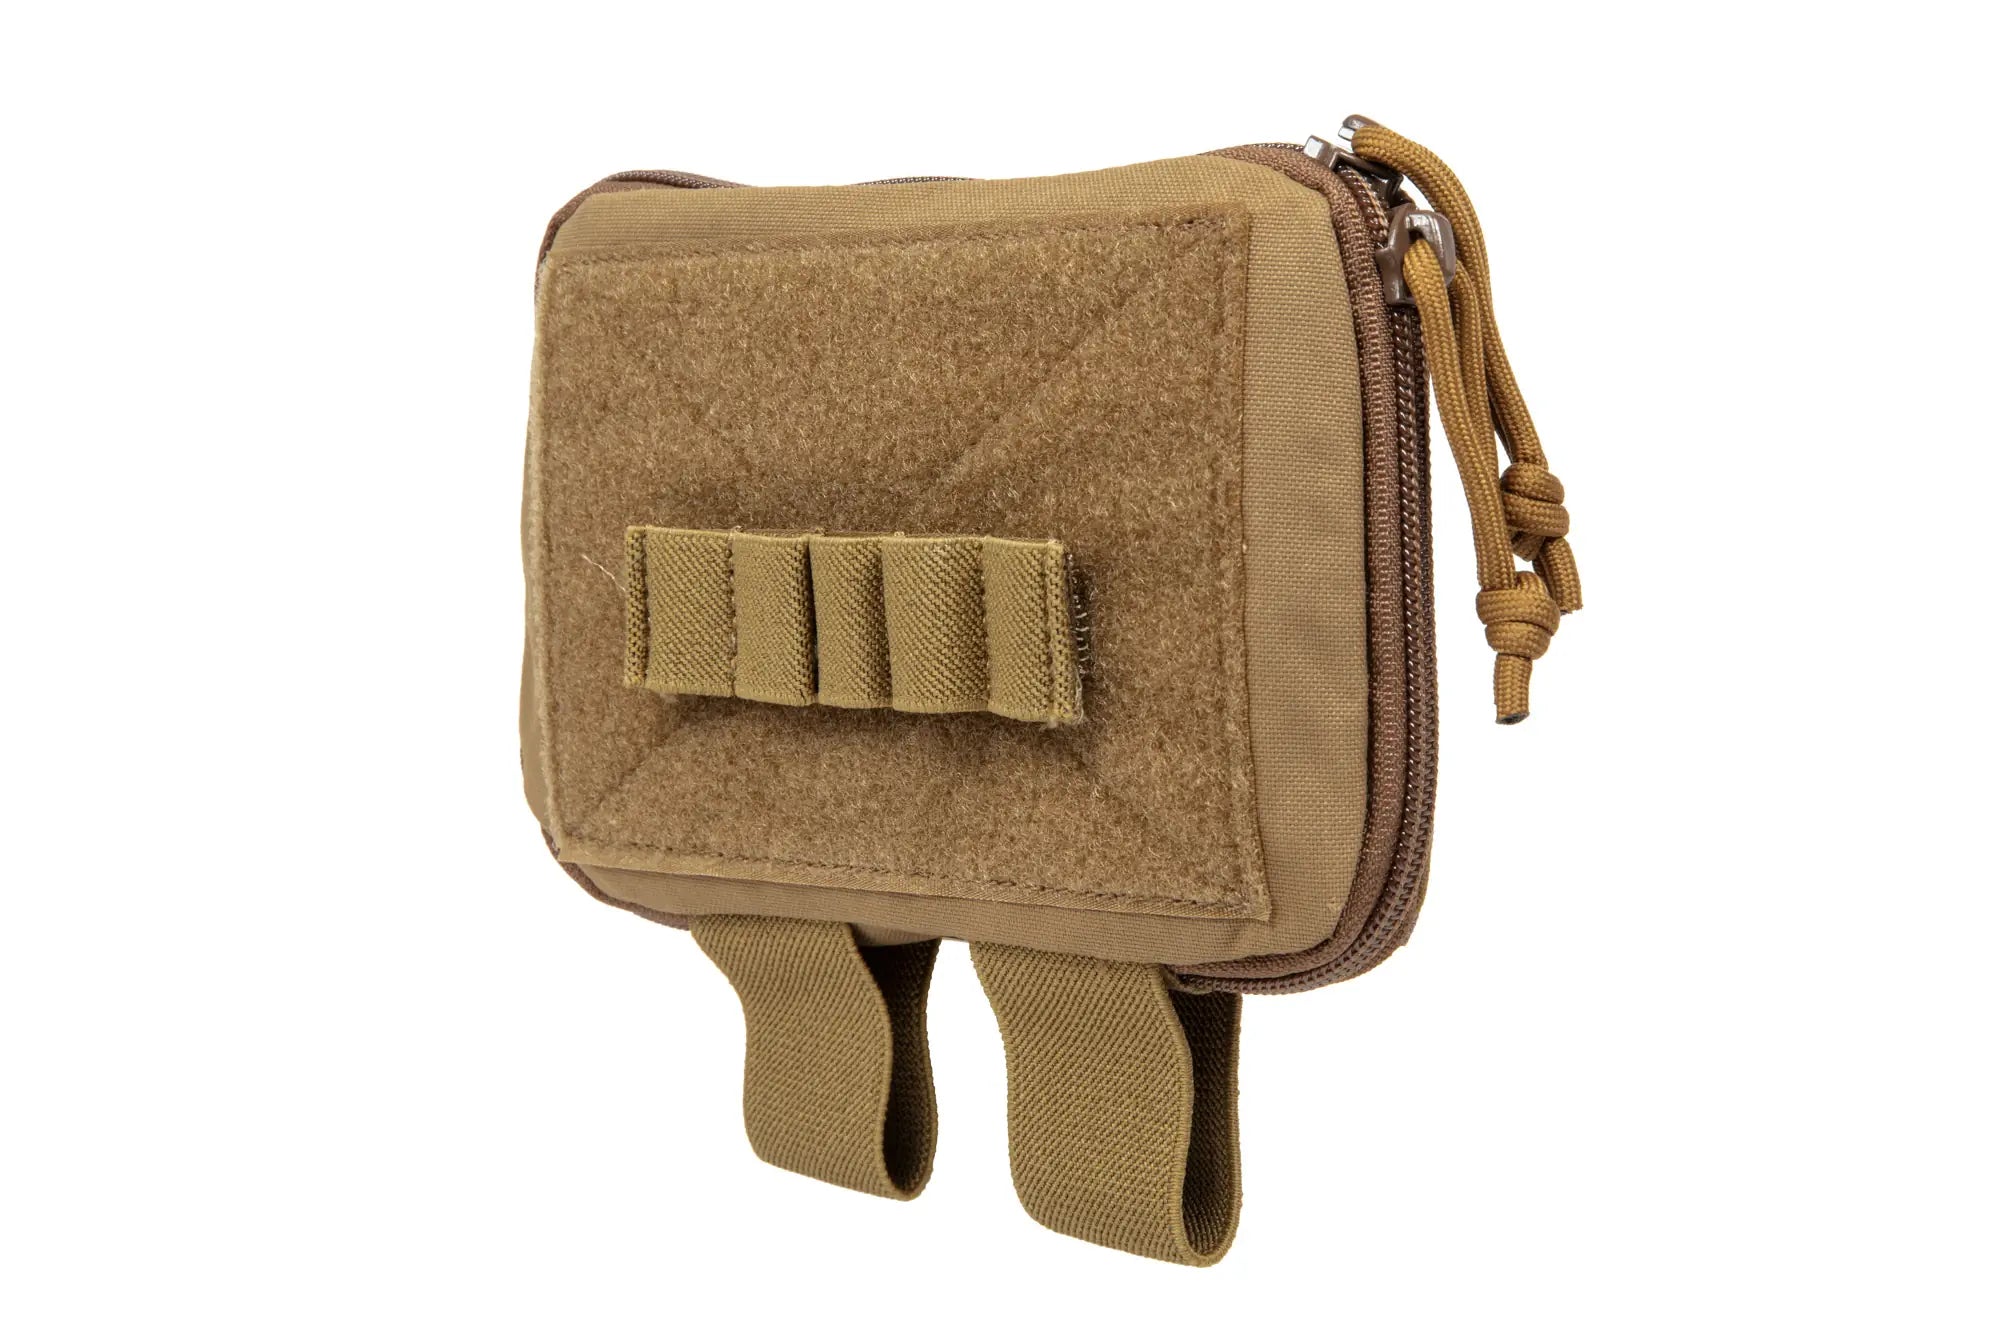 Quick Release First Aid Kit - Coyote Brown